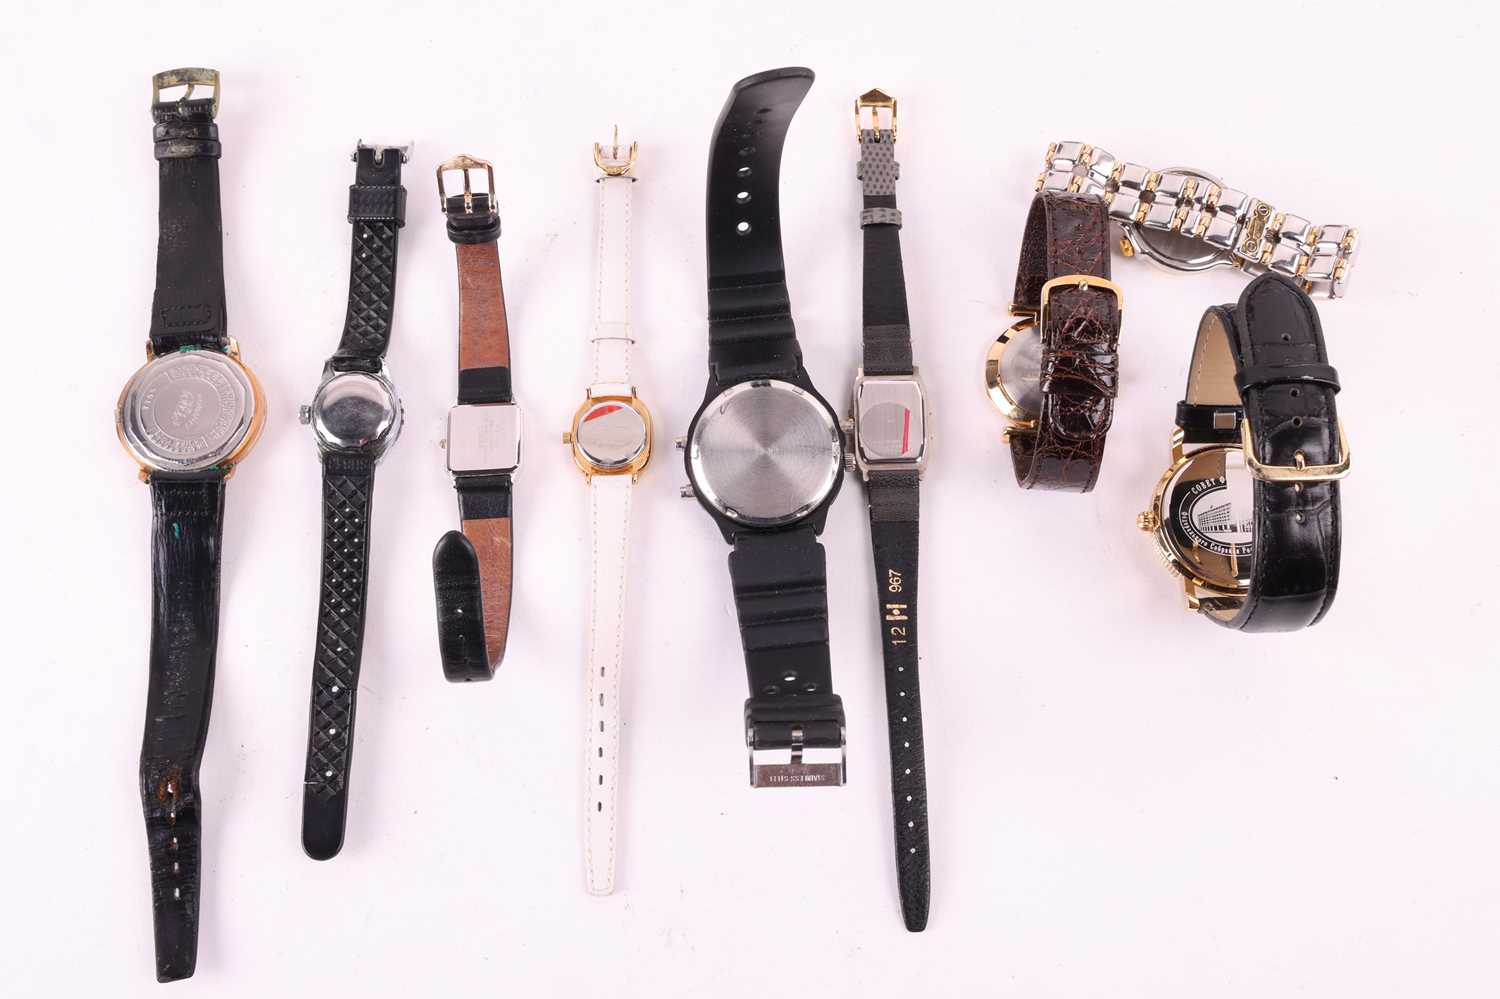 A collection of nine wristwatches, featuring a,Romanel Datostan with a 37mm and hand-wound movement. - Image 2 of 11